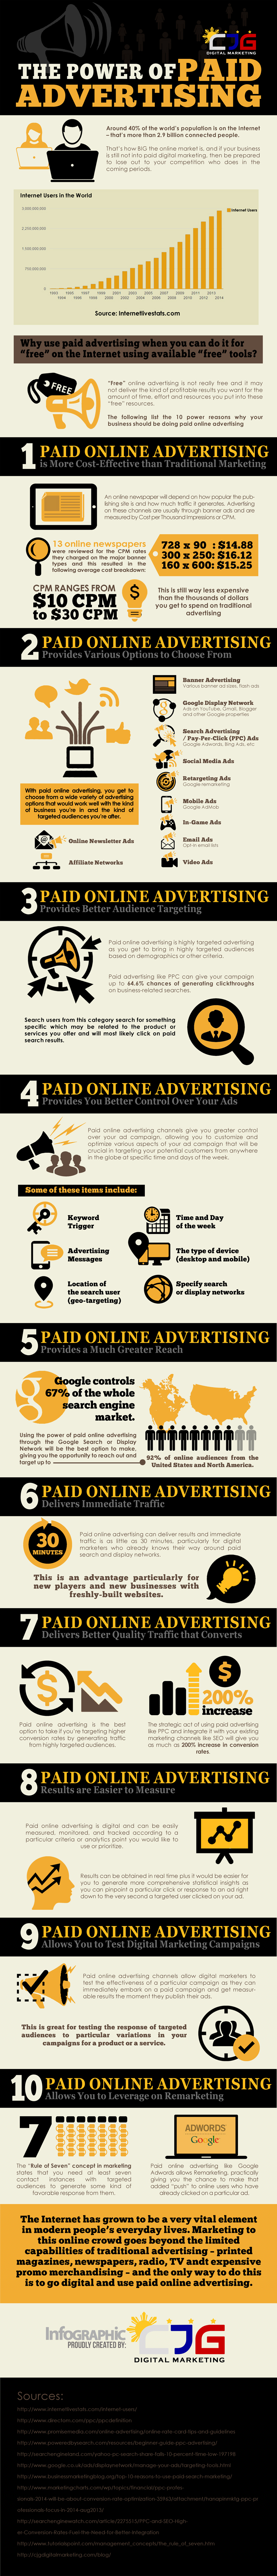 The Power of Paid Online Advertising (Infographic) - An Infographic from CJG Digital Marketing